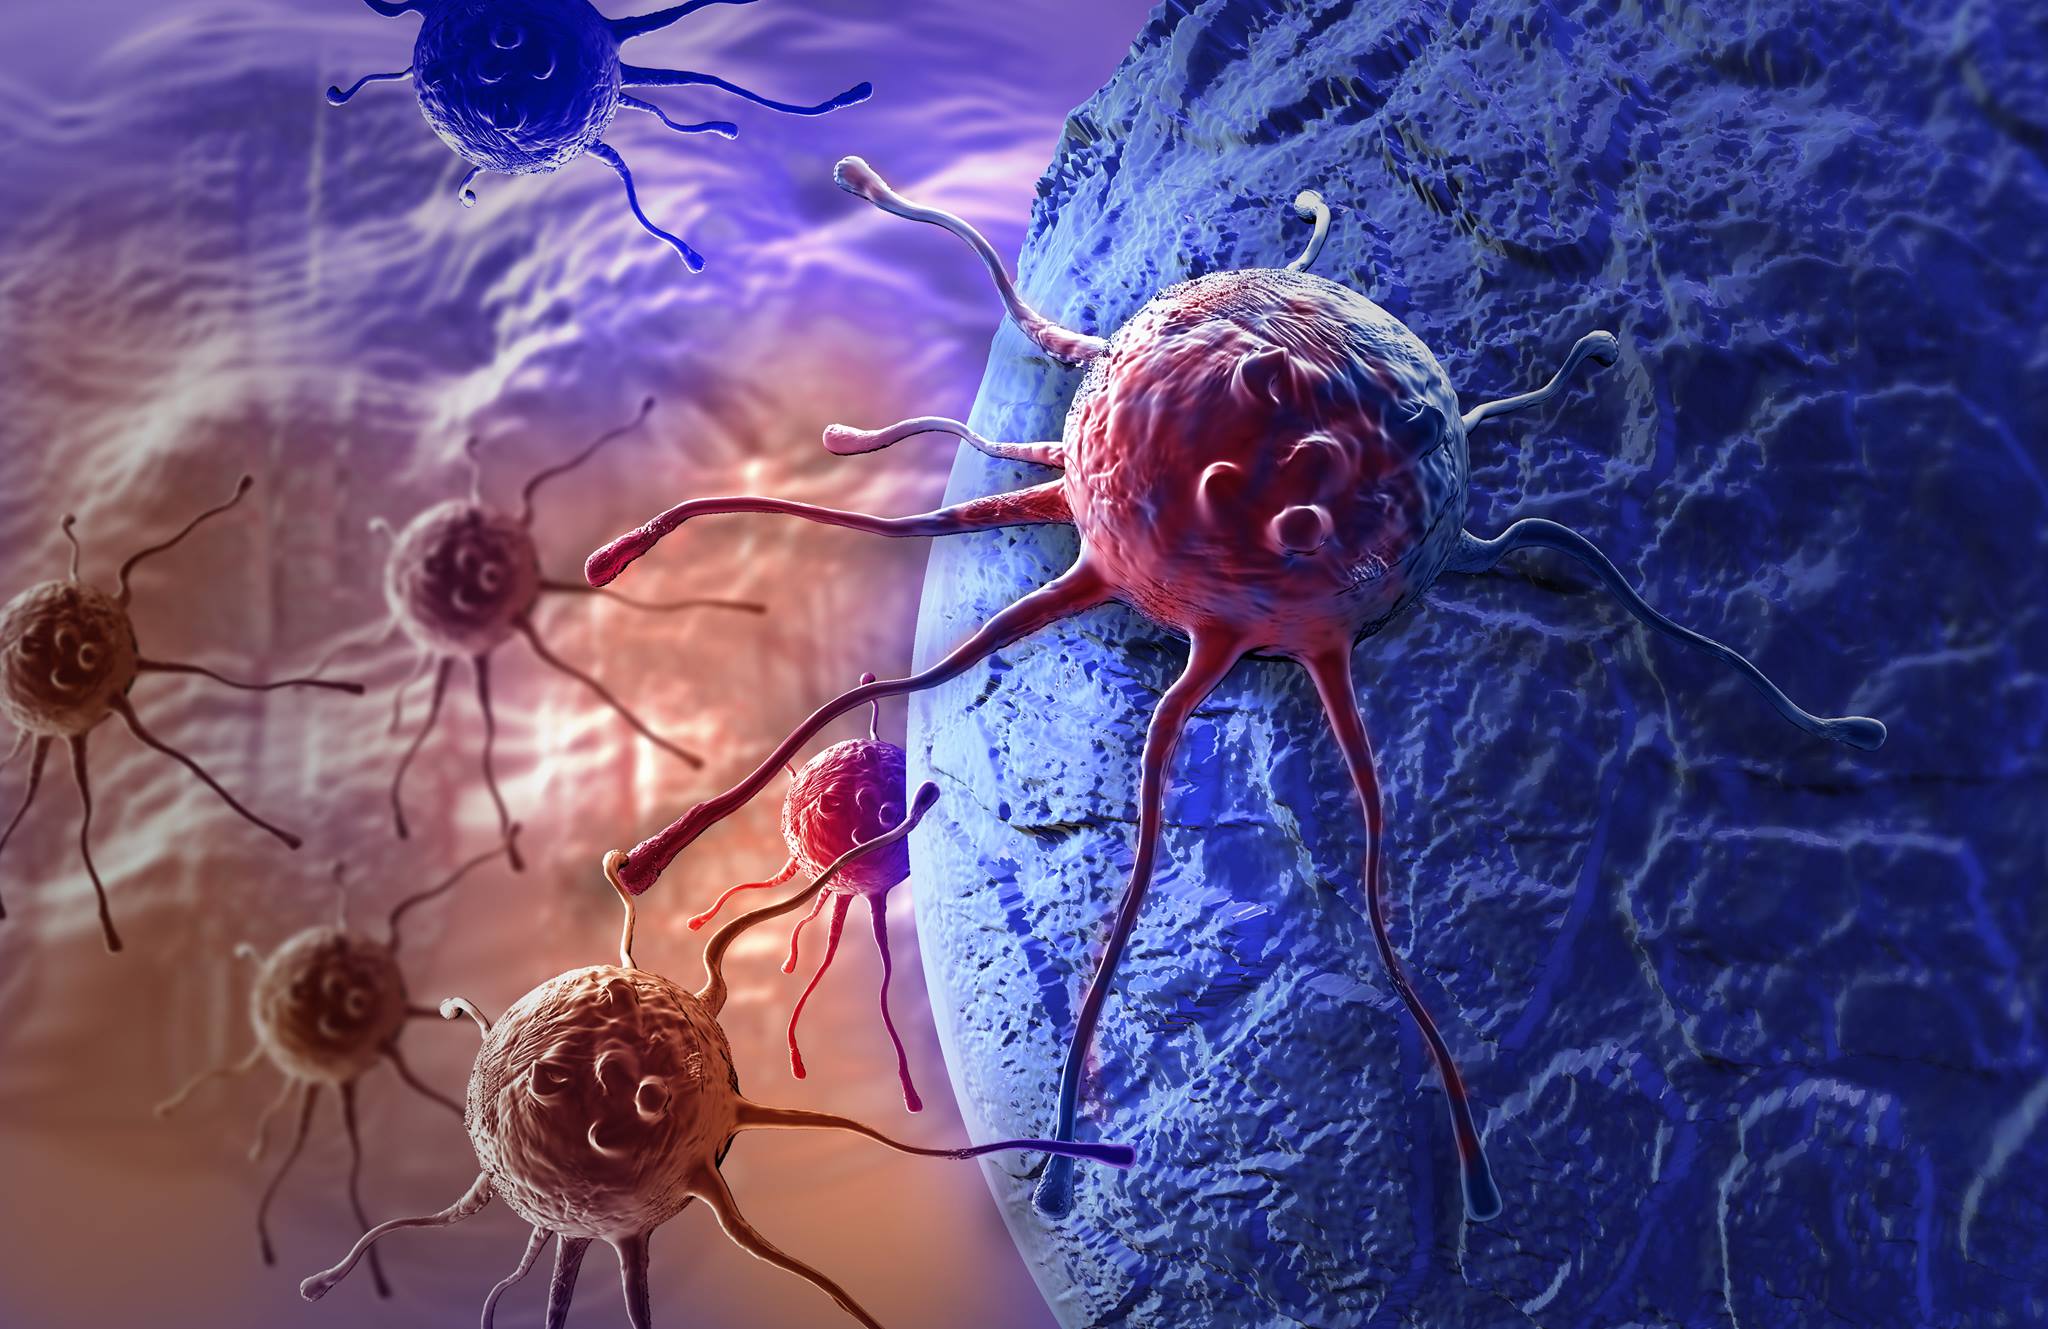 Artist rendering of cancer cells wandering. Credit: Purchased from iStock to illustrate this story. Rights not transferable. 